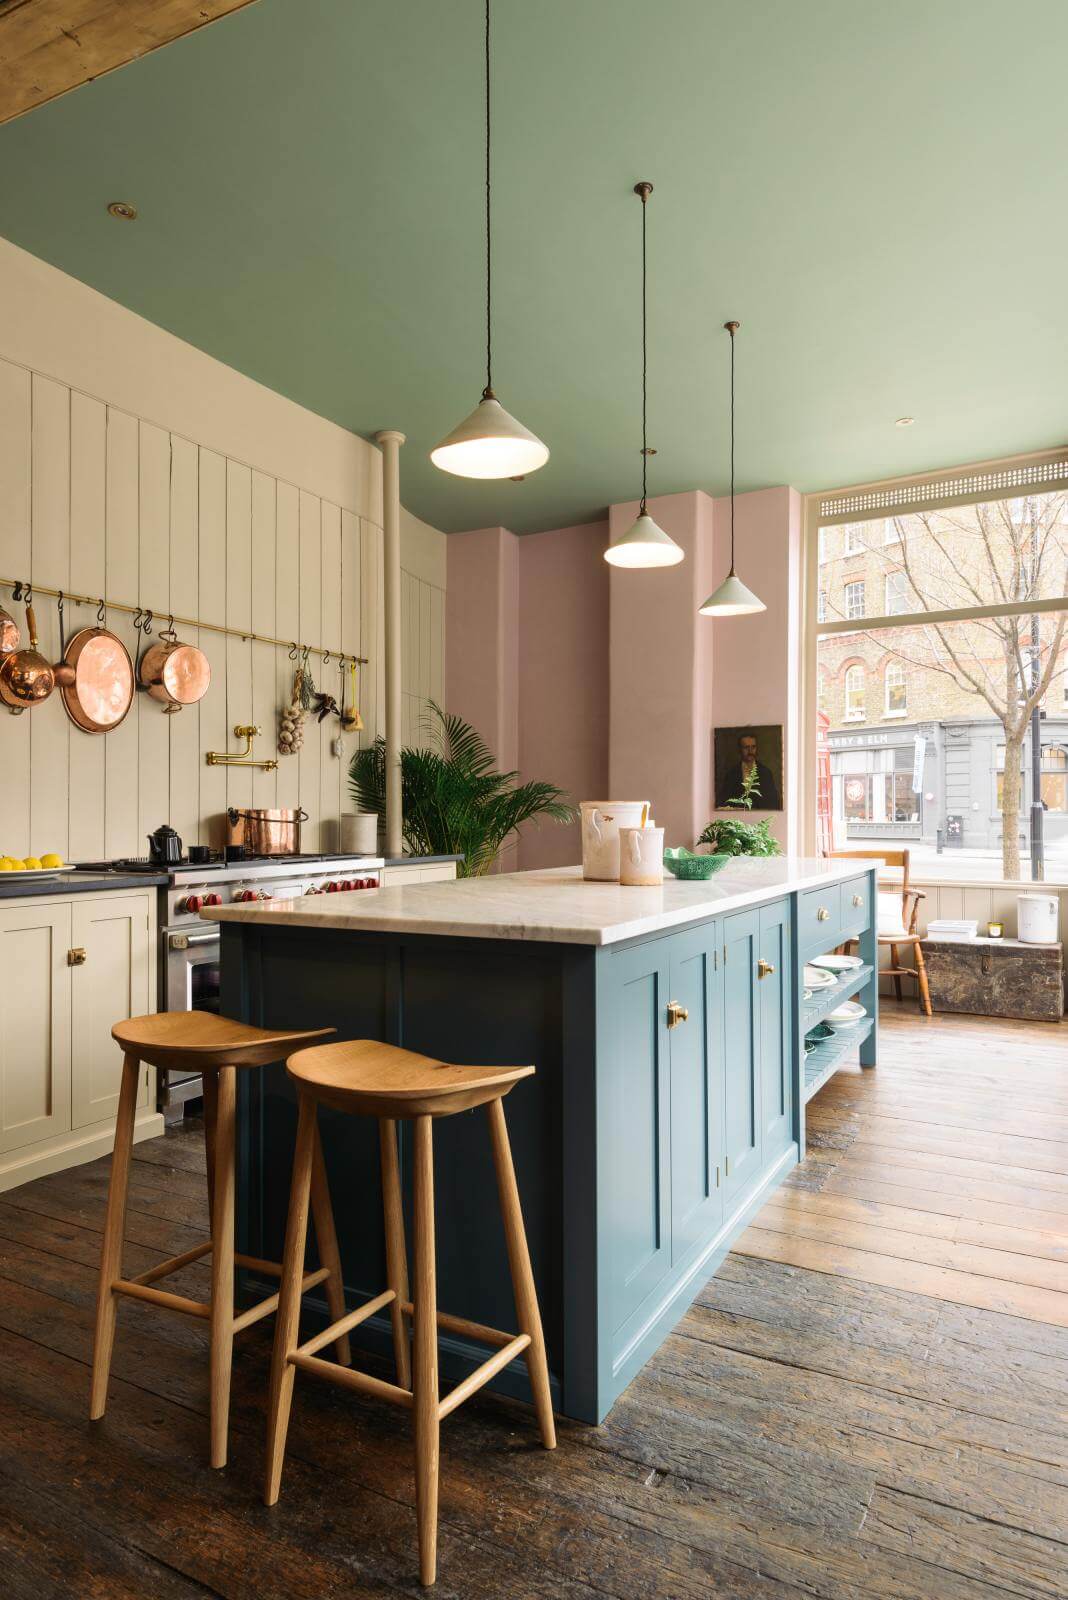 colorful kitchen inspiration nordroom1 14 Colorful Kitchens That Make A Bold Statement